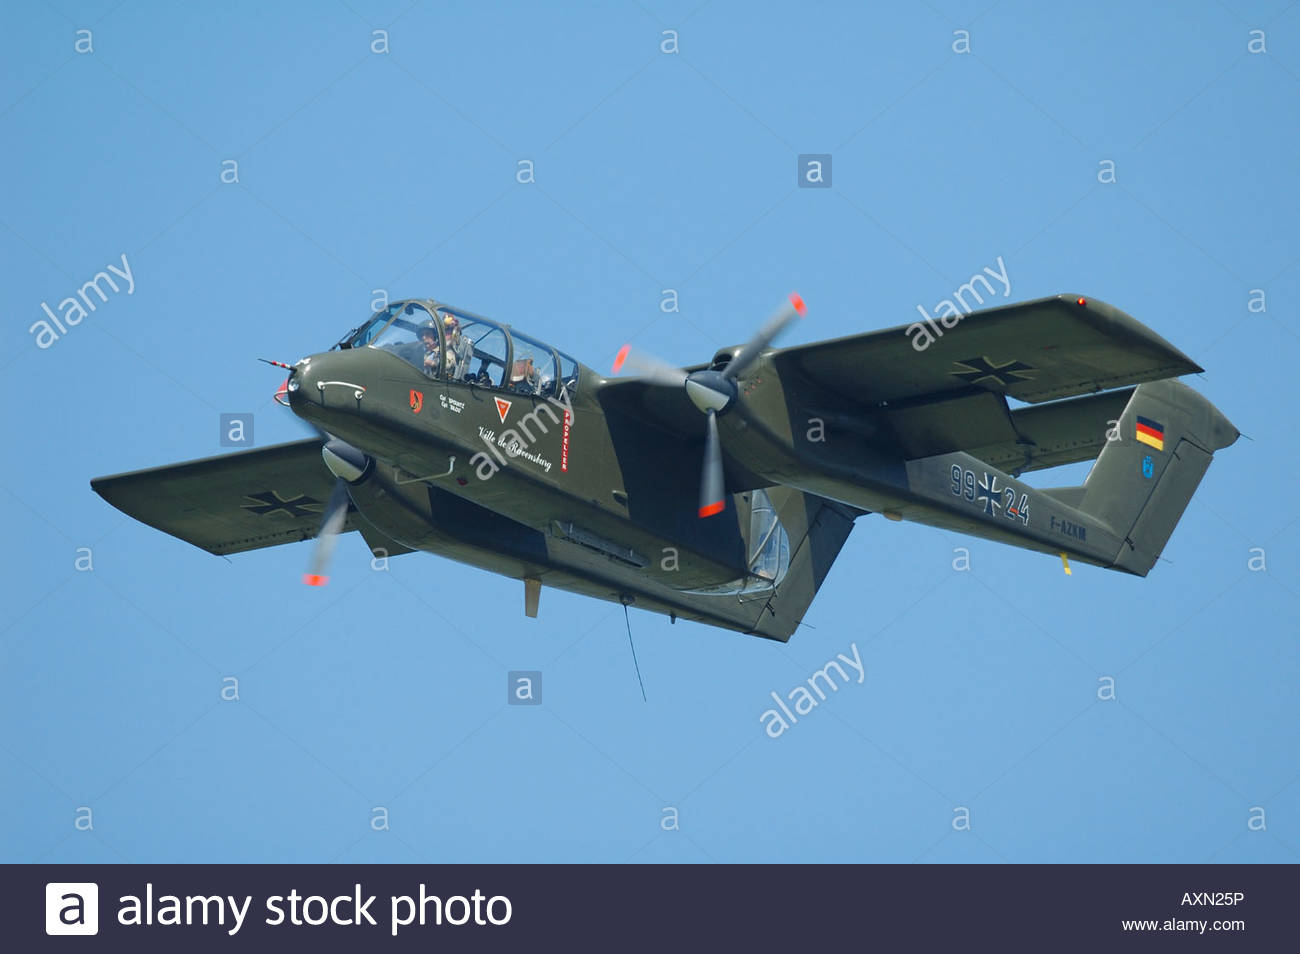 North American Rockwell OV-10 Bronco Pics, Military Collection